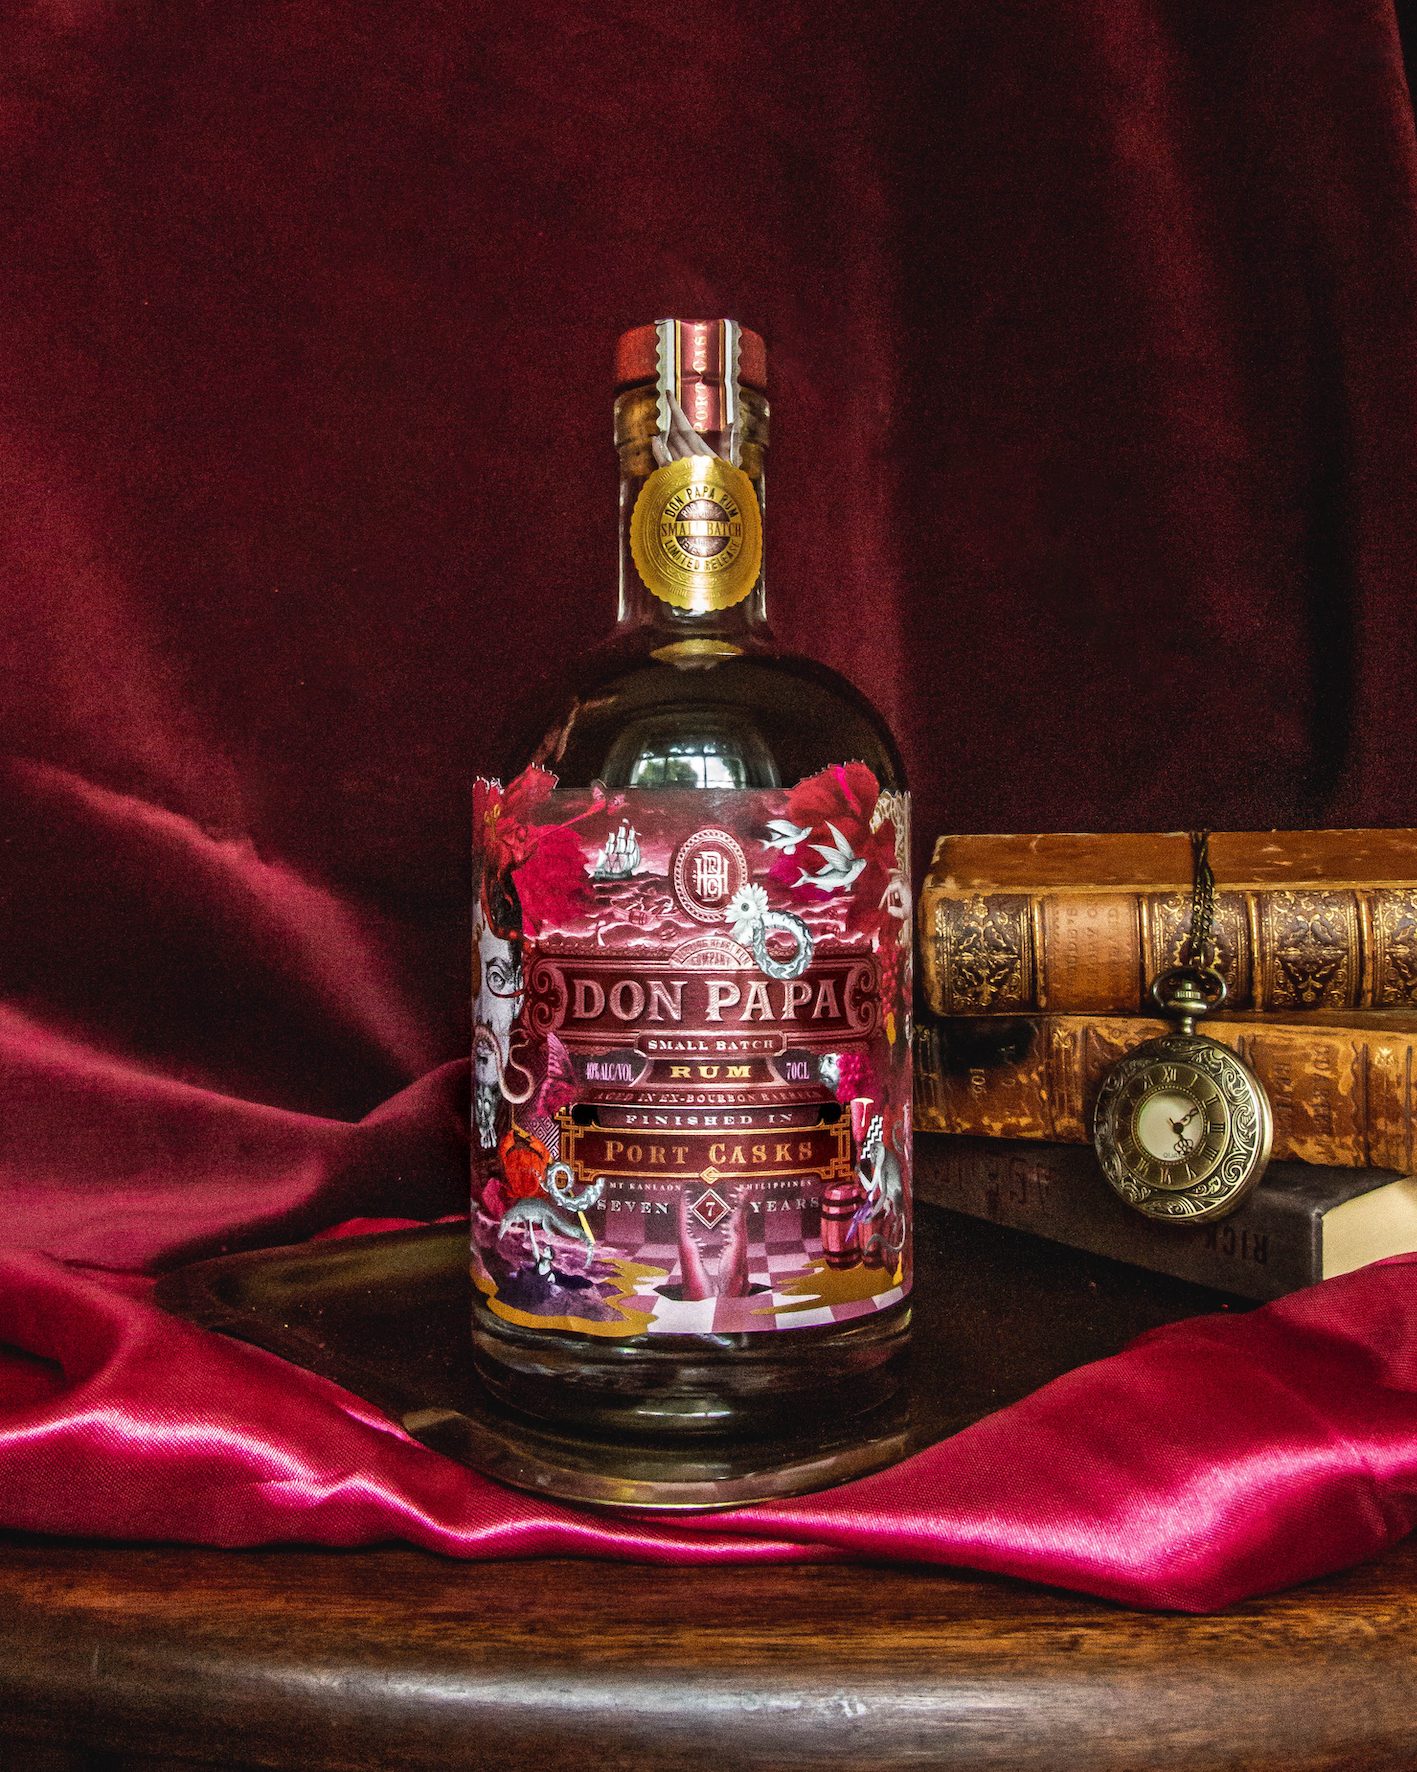 Don Papa’s newest limited edition release is the perfect pre-Christmas gift